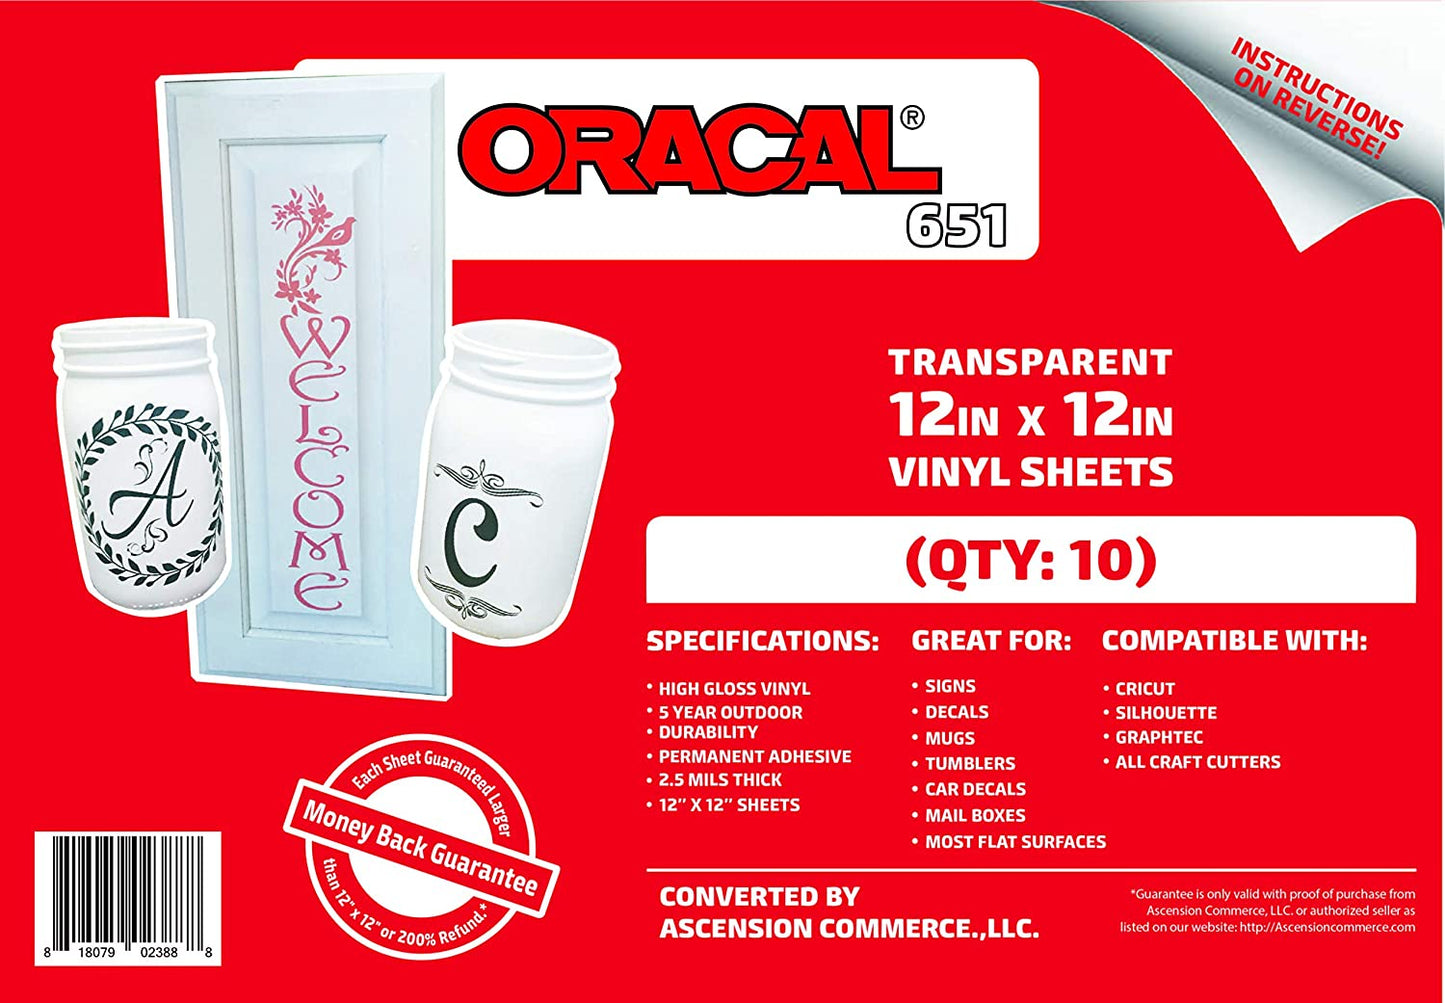 (10 Sheets) Oracal 651 Transparent Adhesive Craft Vinyl for Cricut, Silhouette, Cameo, Craft Cutters, Printers, and Decals - 12" x 12" - Gloss Finish - Outdoor and Permanent - (For 12 piece(s))